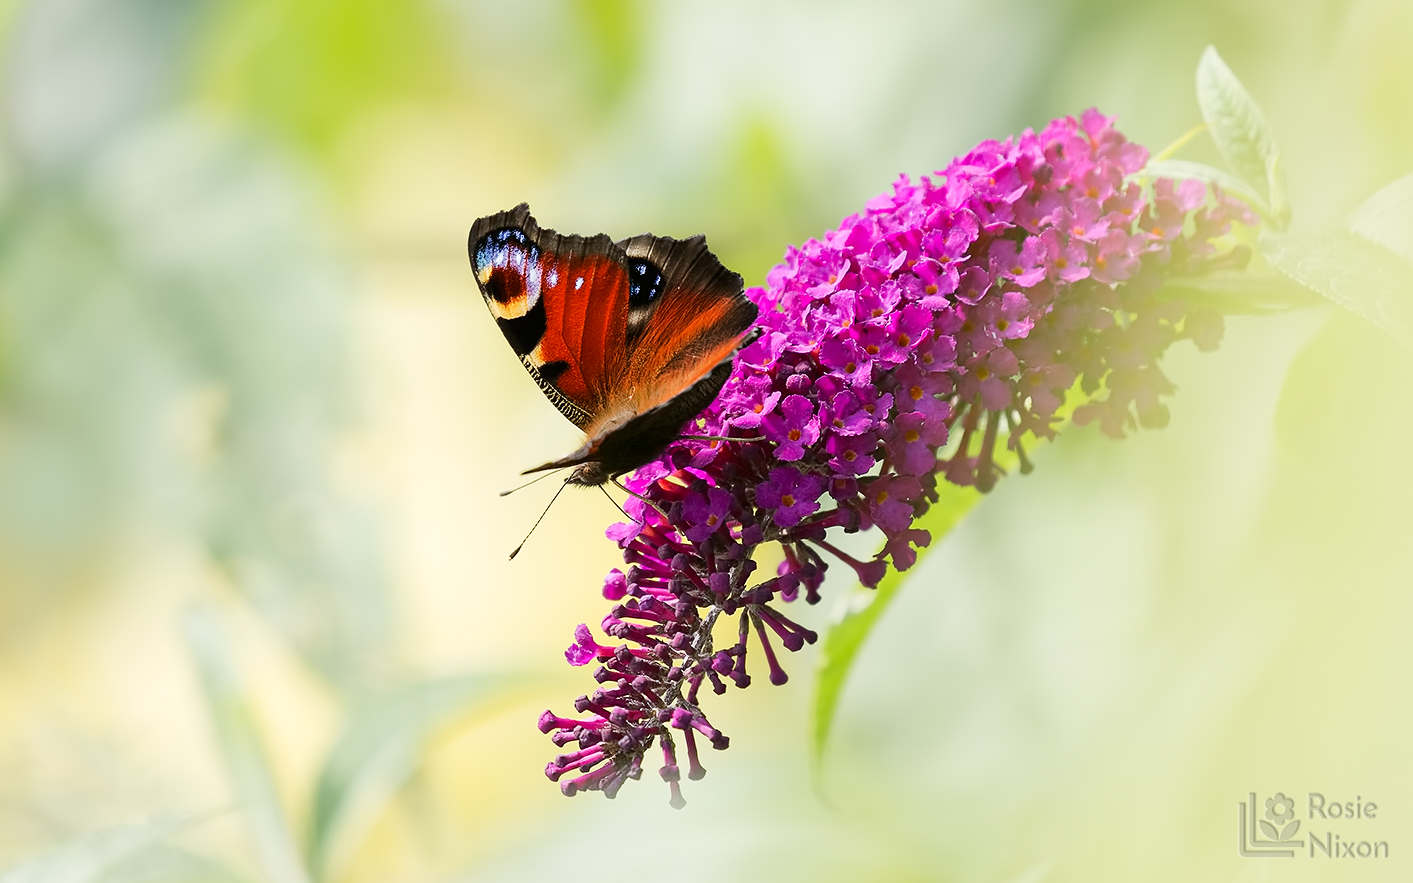 A peacock butterfly drinking nectar from a butterfly bush in summer.